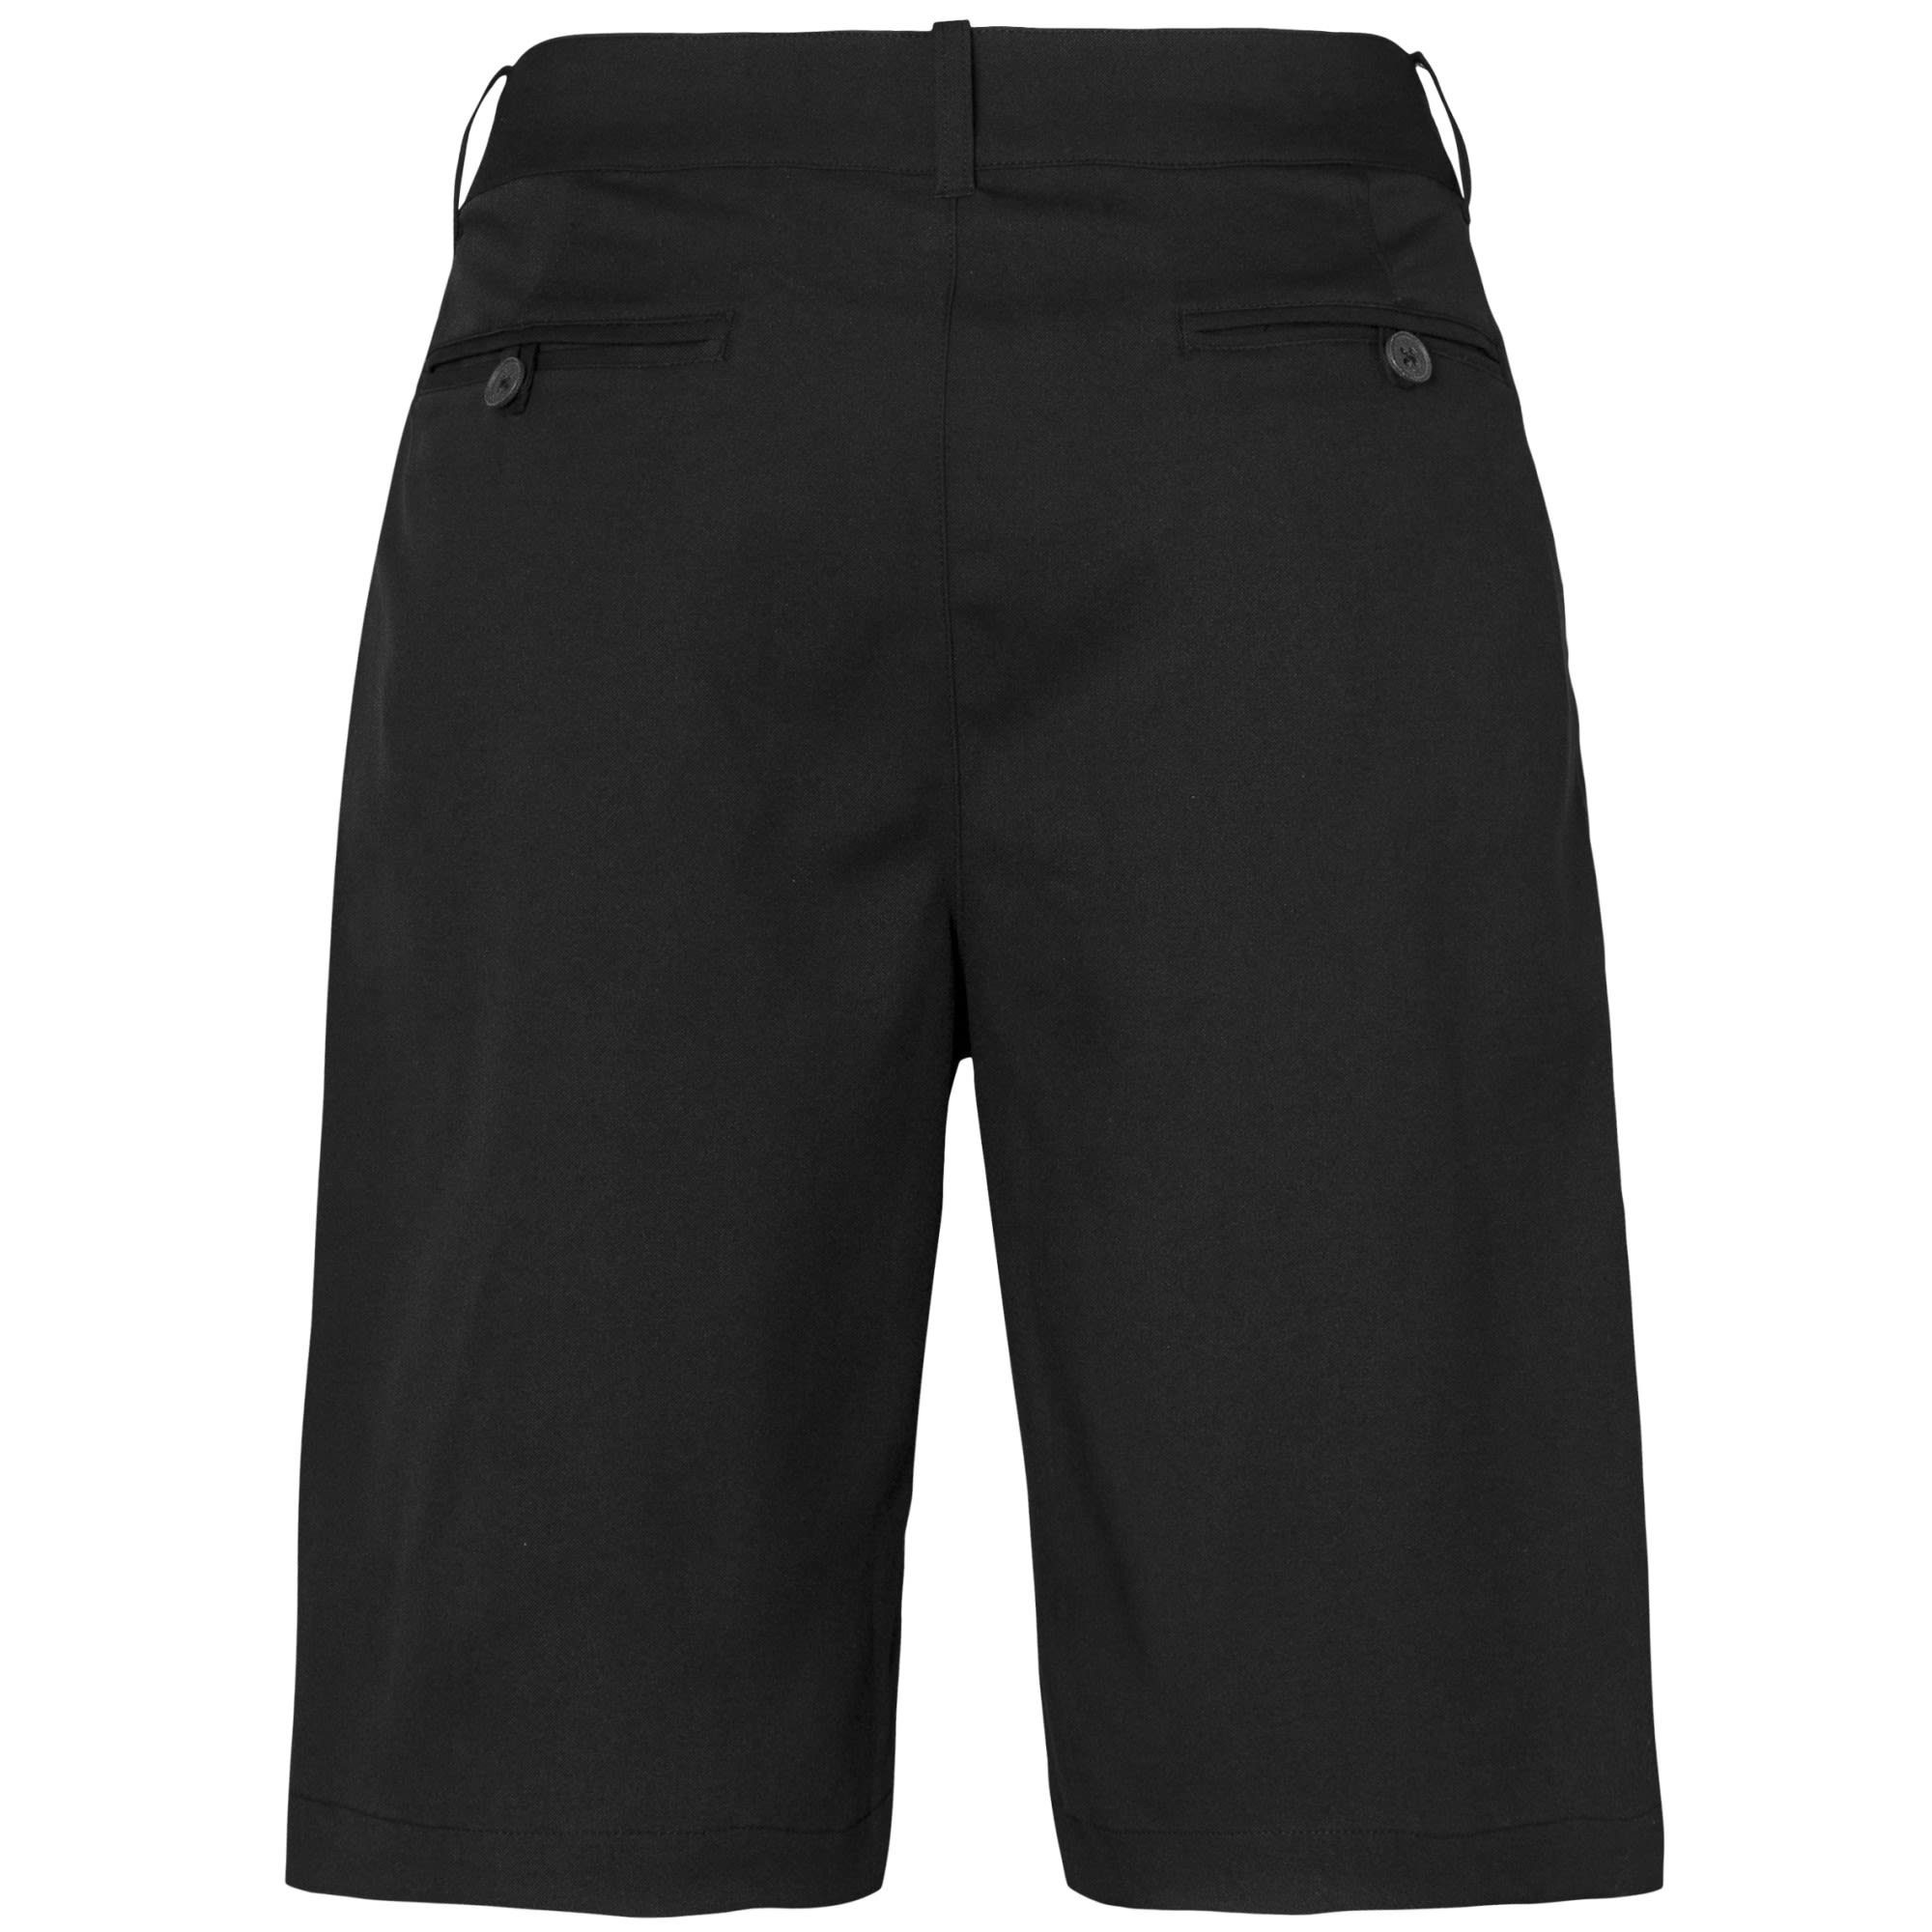 Shorts Protection Herren M Protection Sweet Strandshorts Shorts Sweet Sweet